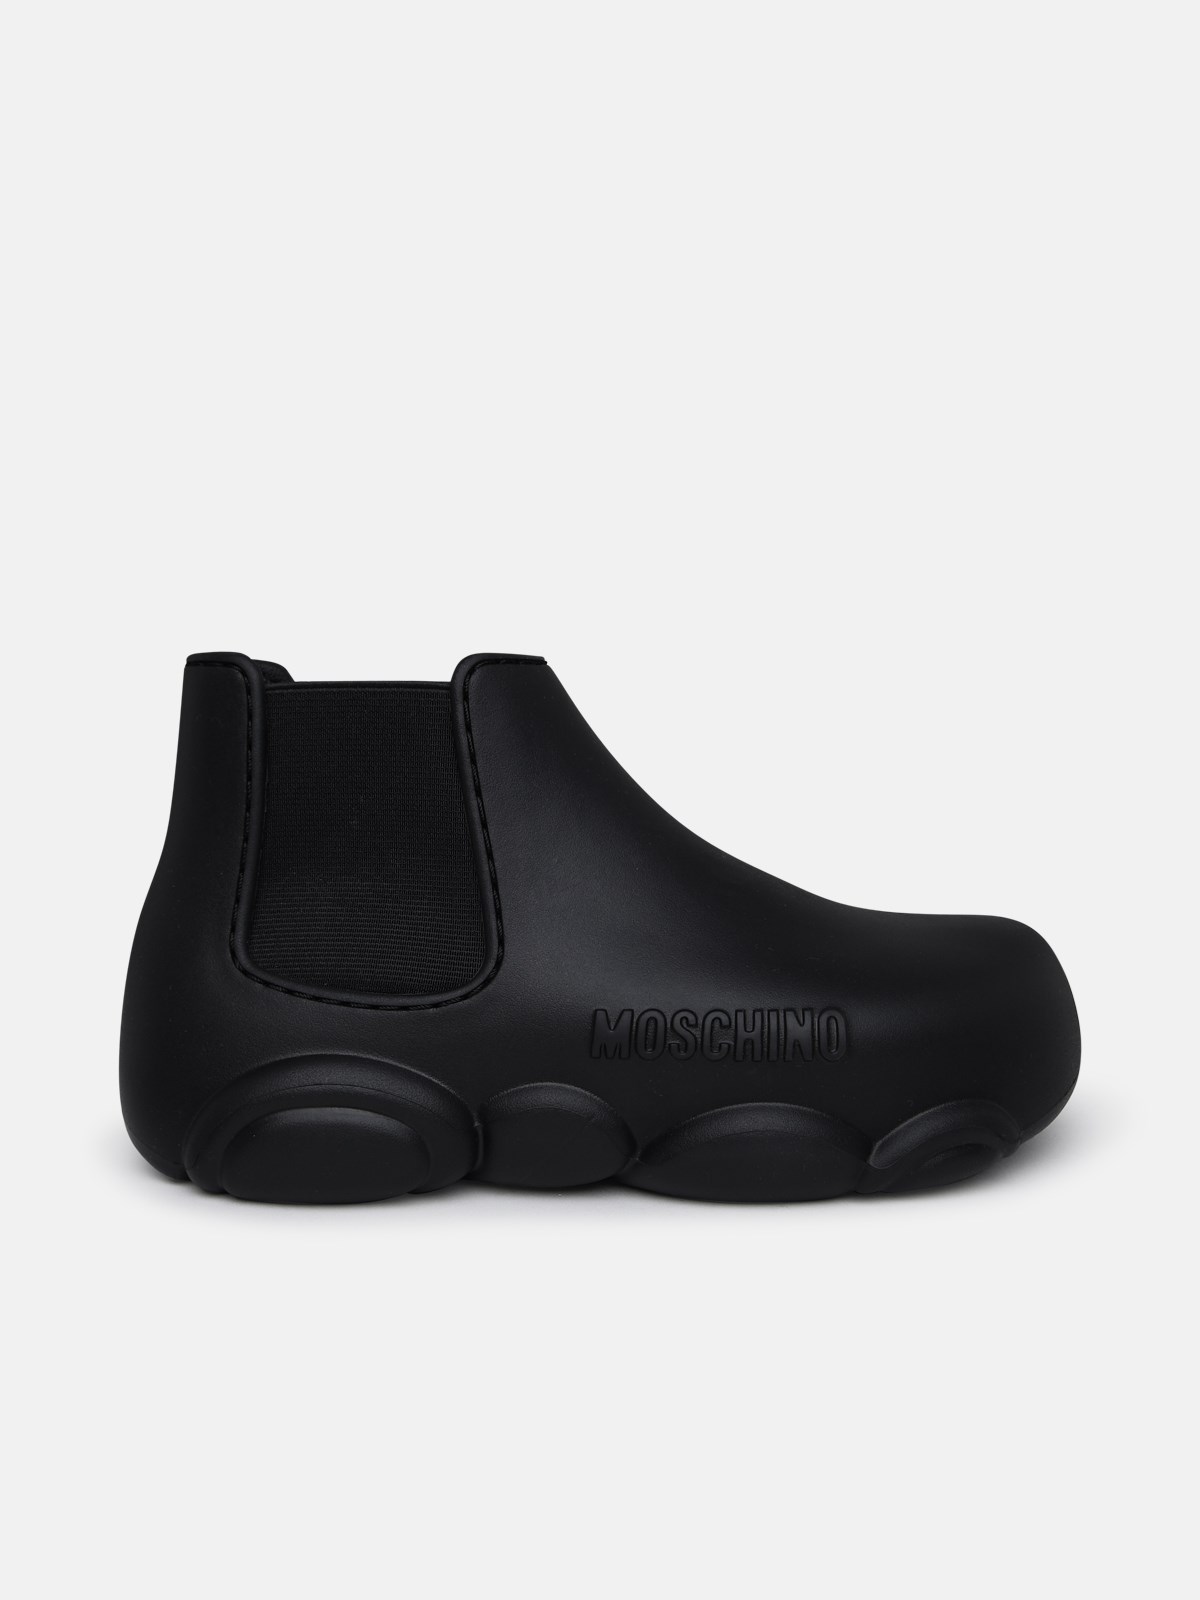 Moschino Black Rubber Ankle Boots